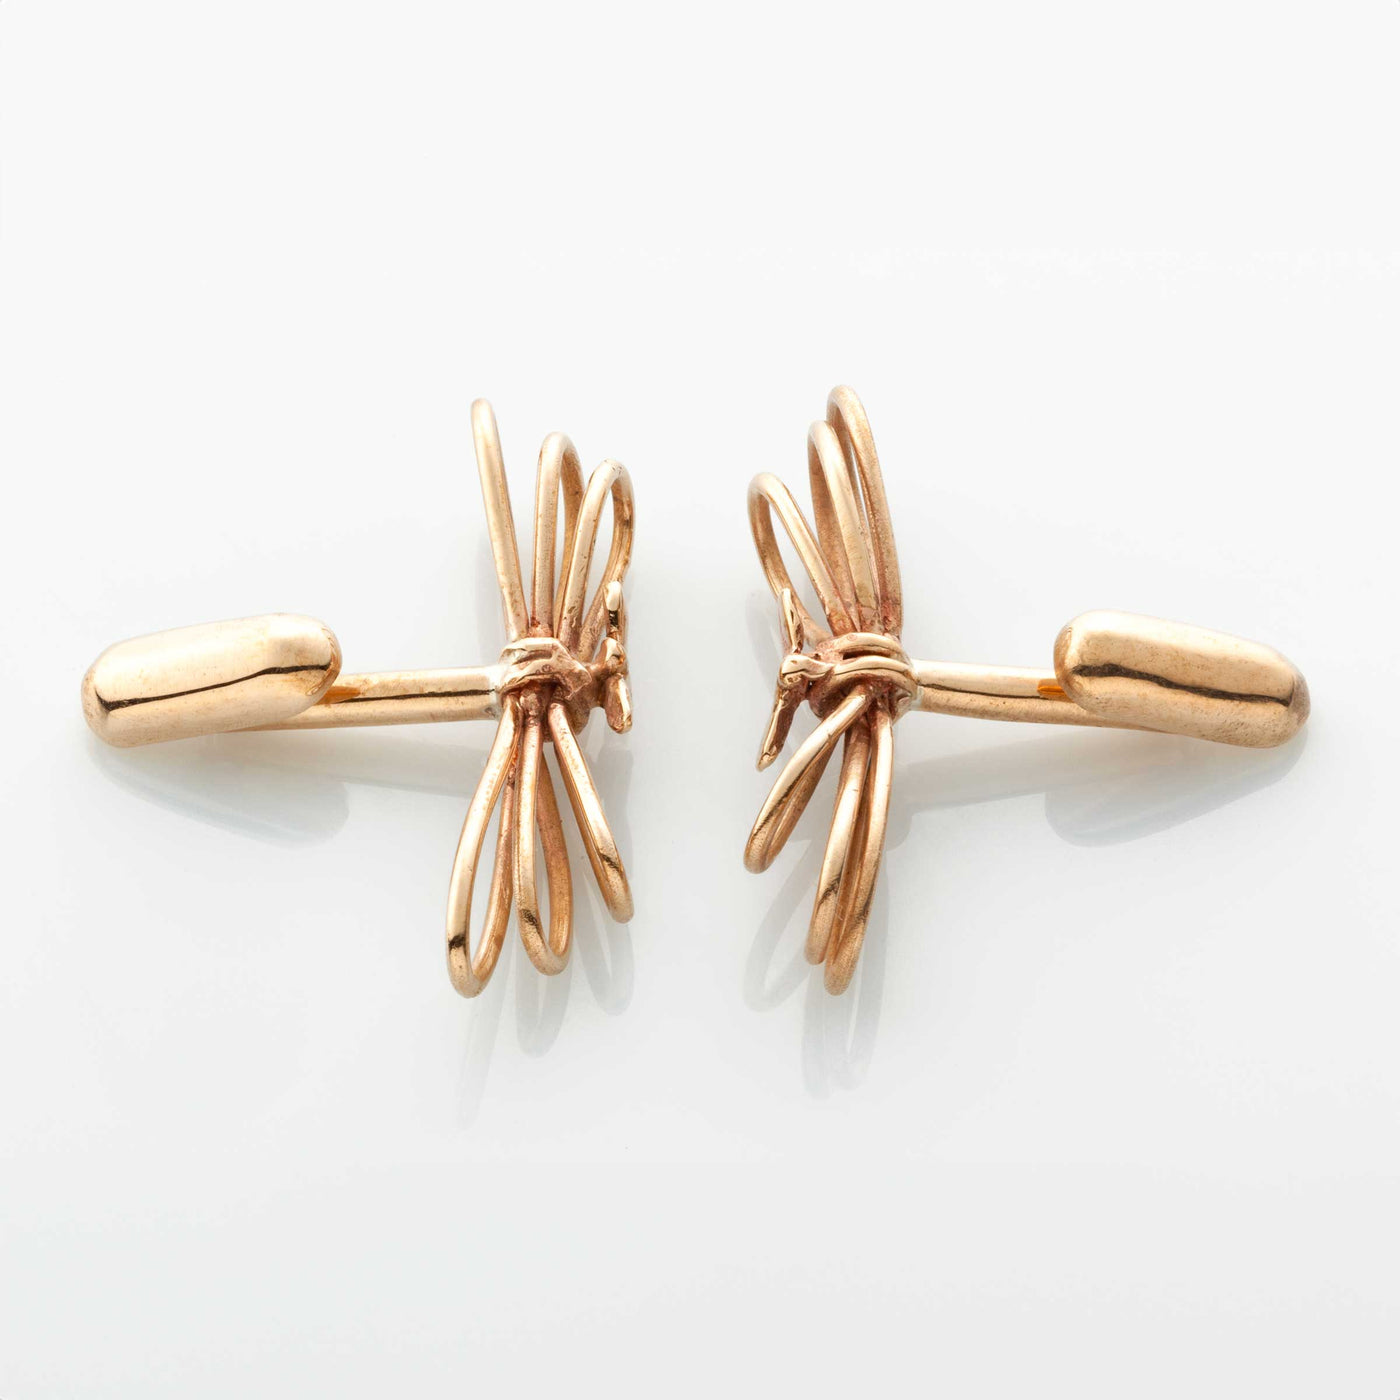 Bronze Cufflinks VOLI PICCOLI by Jessica Carroll for BABS Art Gallery - Limited Edition 03